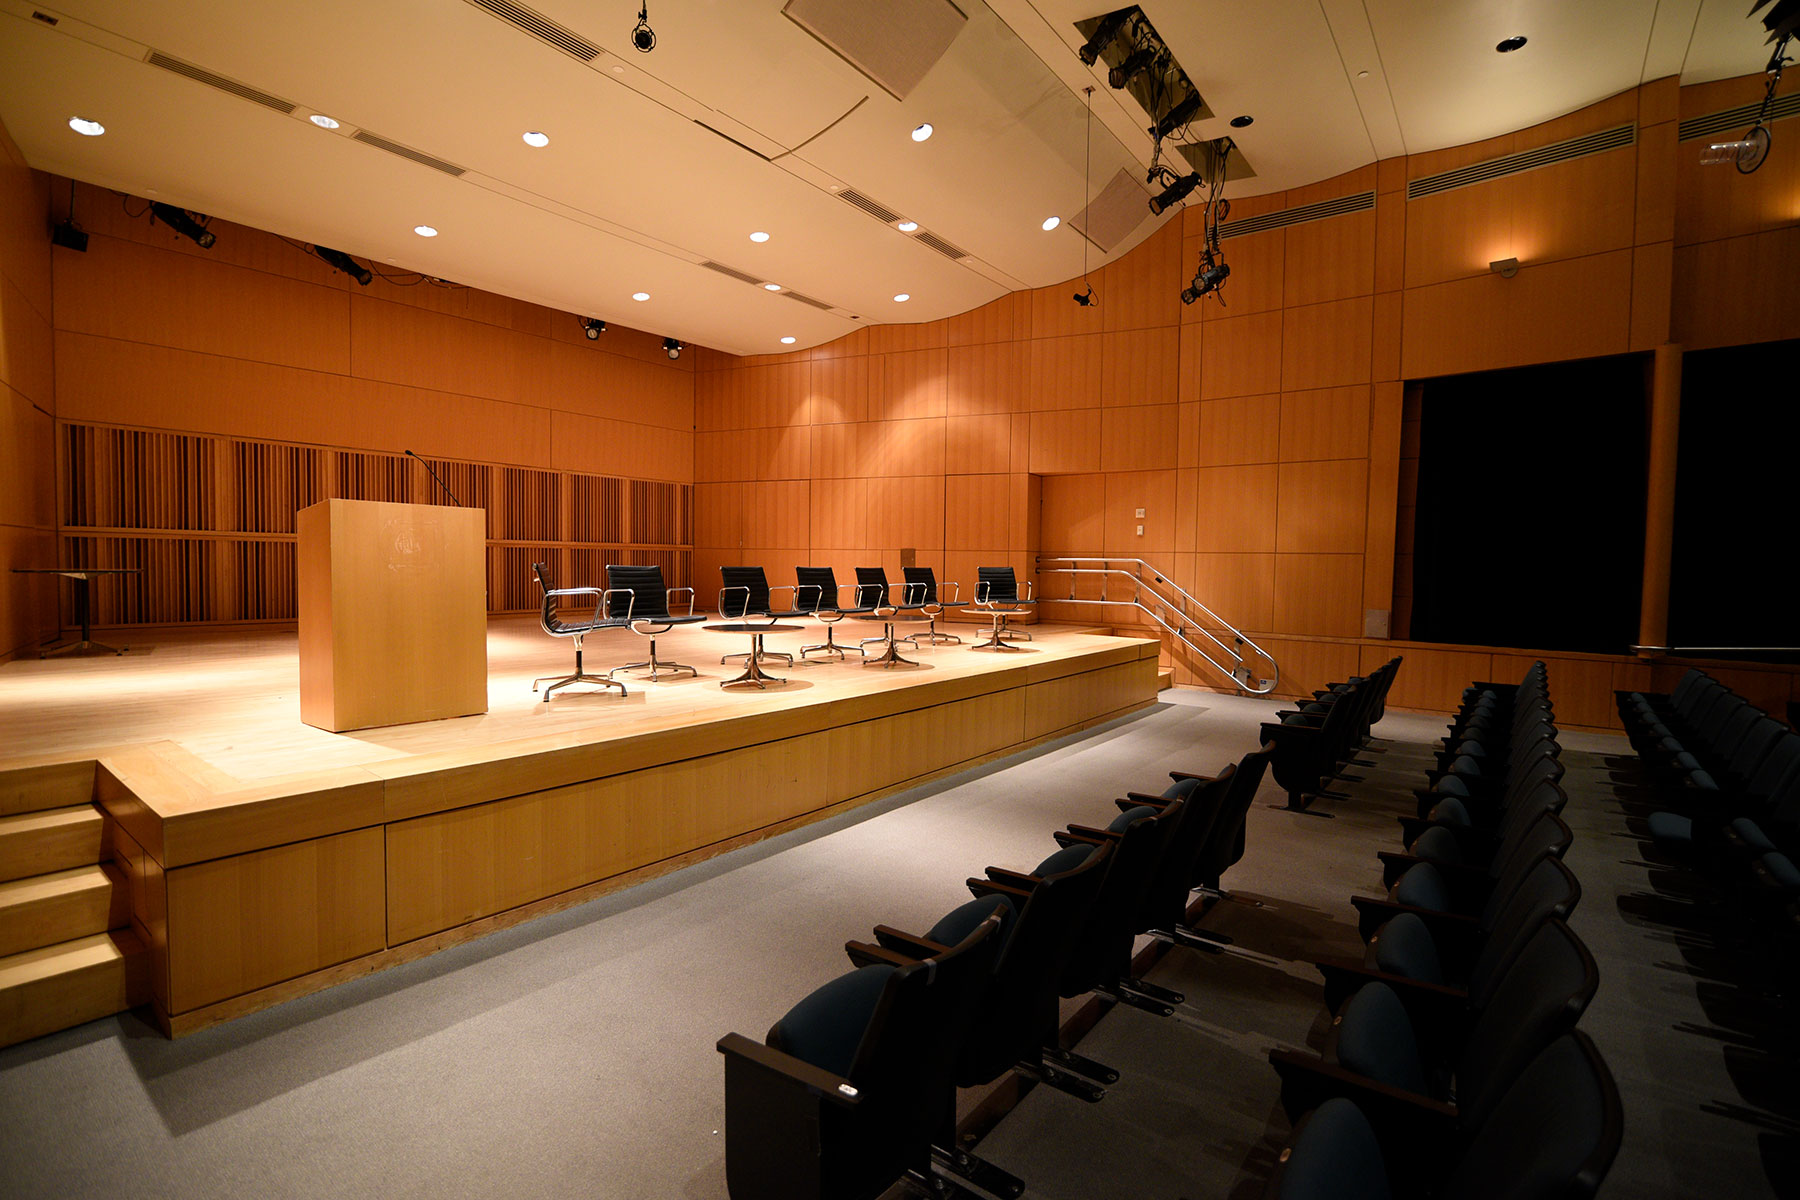 Elebash Recital Hall - Theater Rental in NYC. Front of auditorium - front row seating and stage.